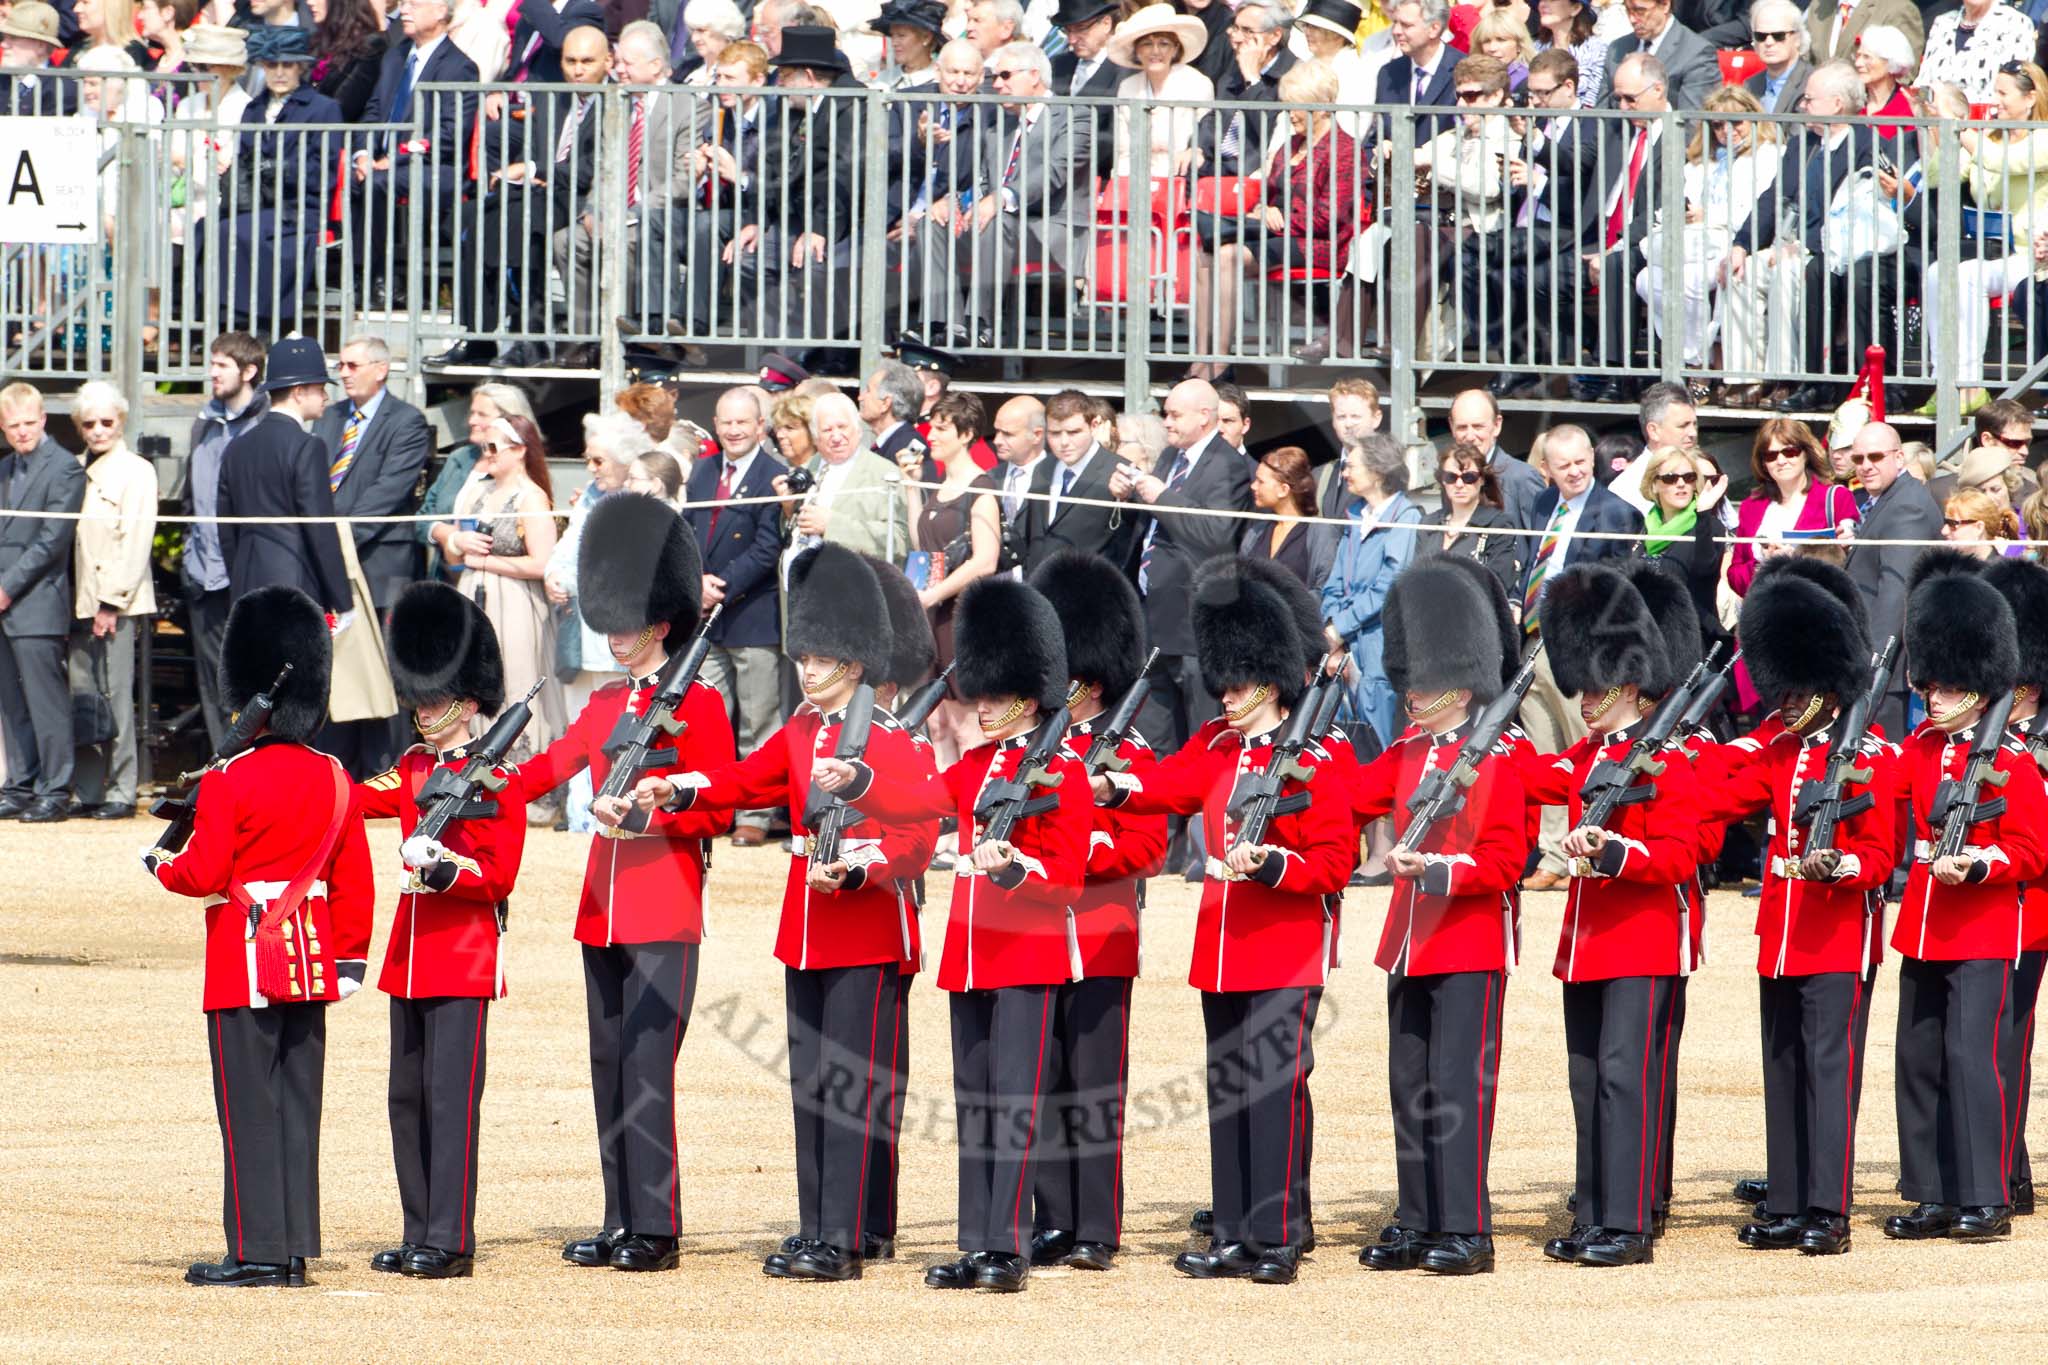 Trooping the Colour 2011: No. 6 Guard, No. 7 Company,  Coldstream Guards..
Horse Guards Parade, Westminster,
London SW1,
Greater London,
United Kingdom,
on 11 June 2011 at 10:26, image #34